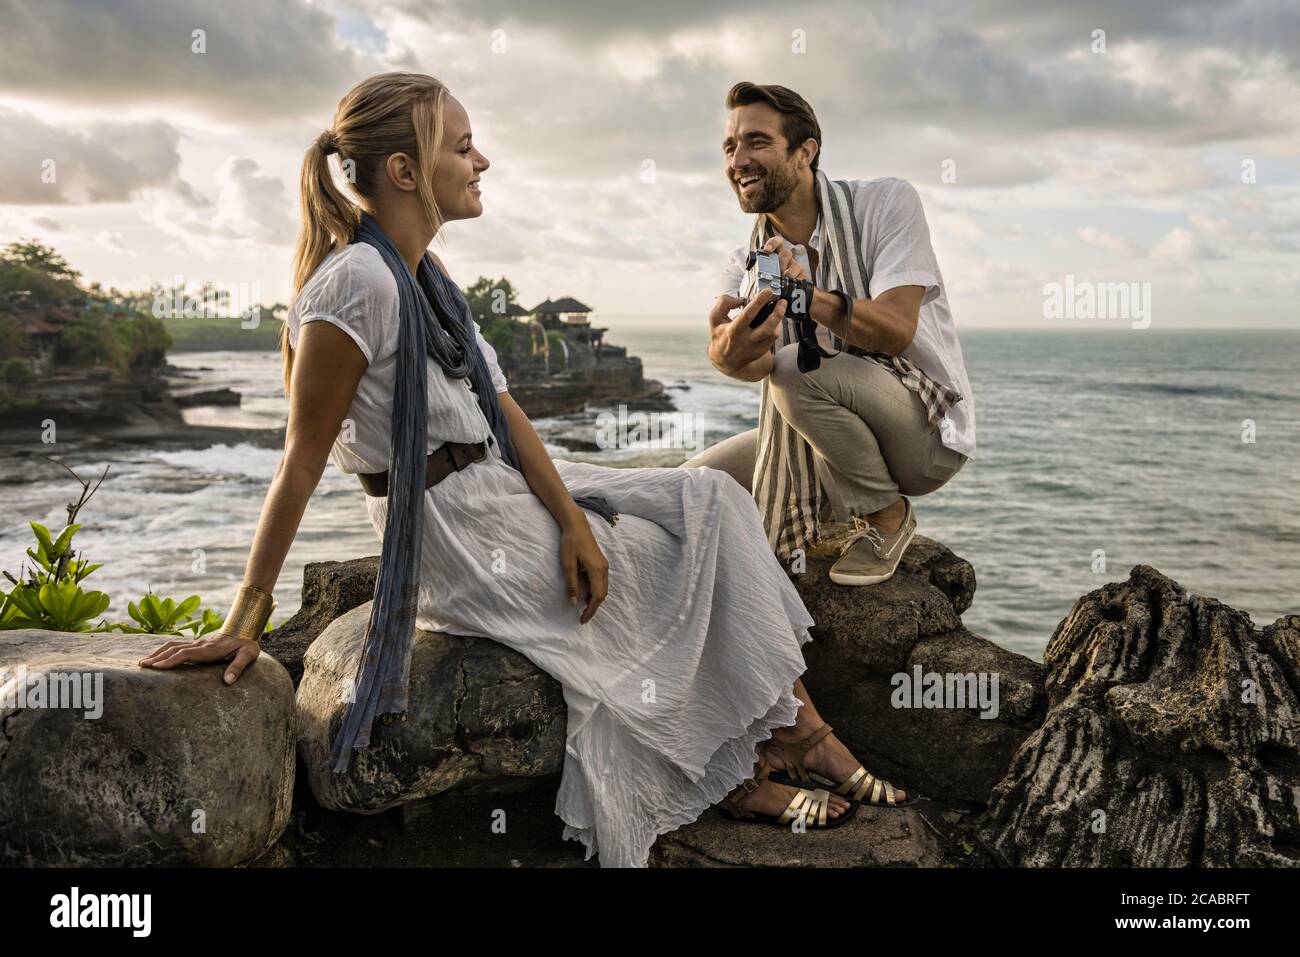 Asia, Indonesia, Bali, young Caucasian couple, wearing smart casual clothing, enjoying a visit to the famous Hindu temple Tanalot, which is one of the Stock Photo